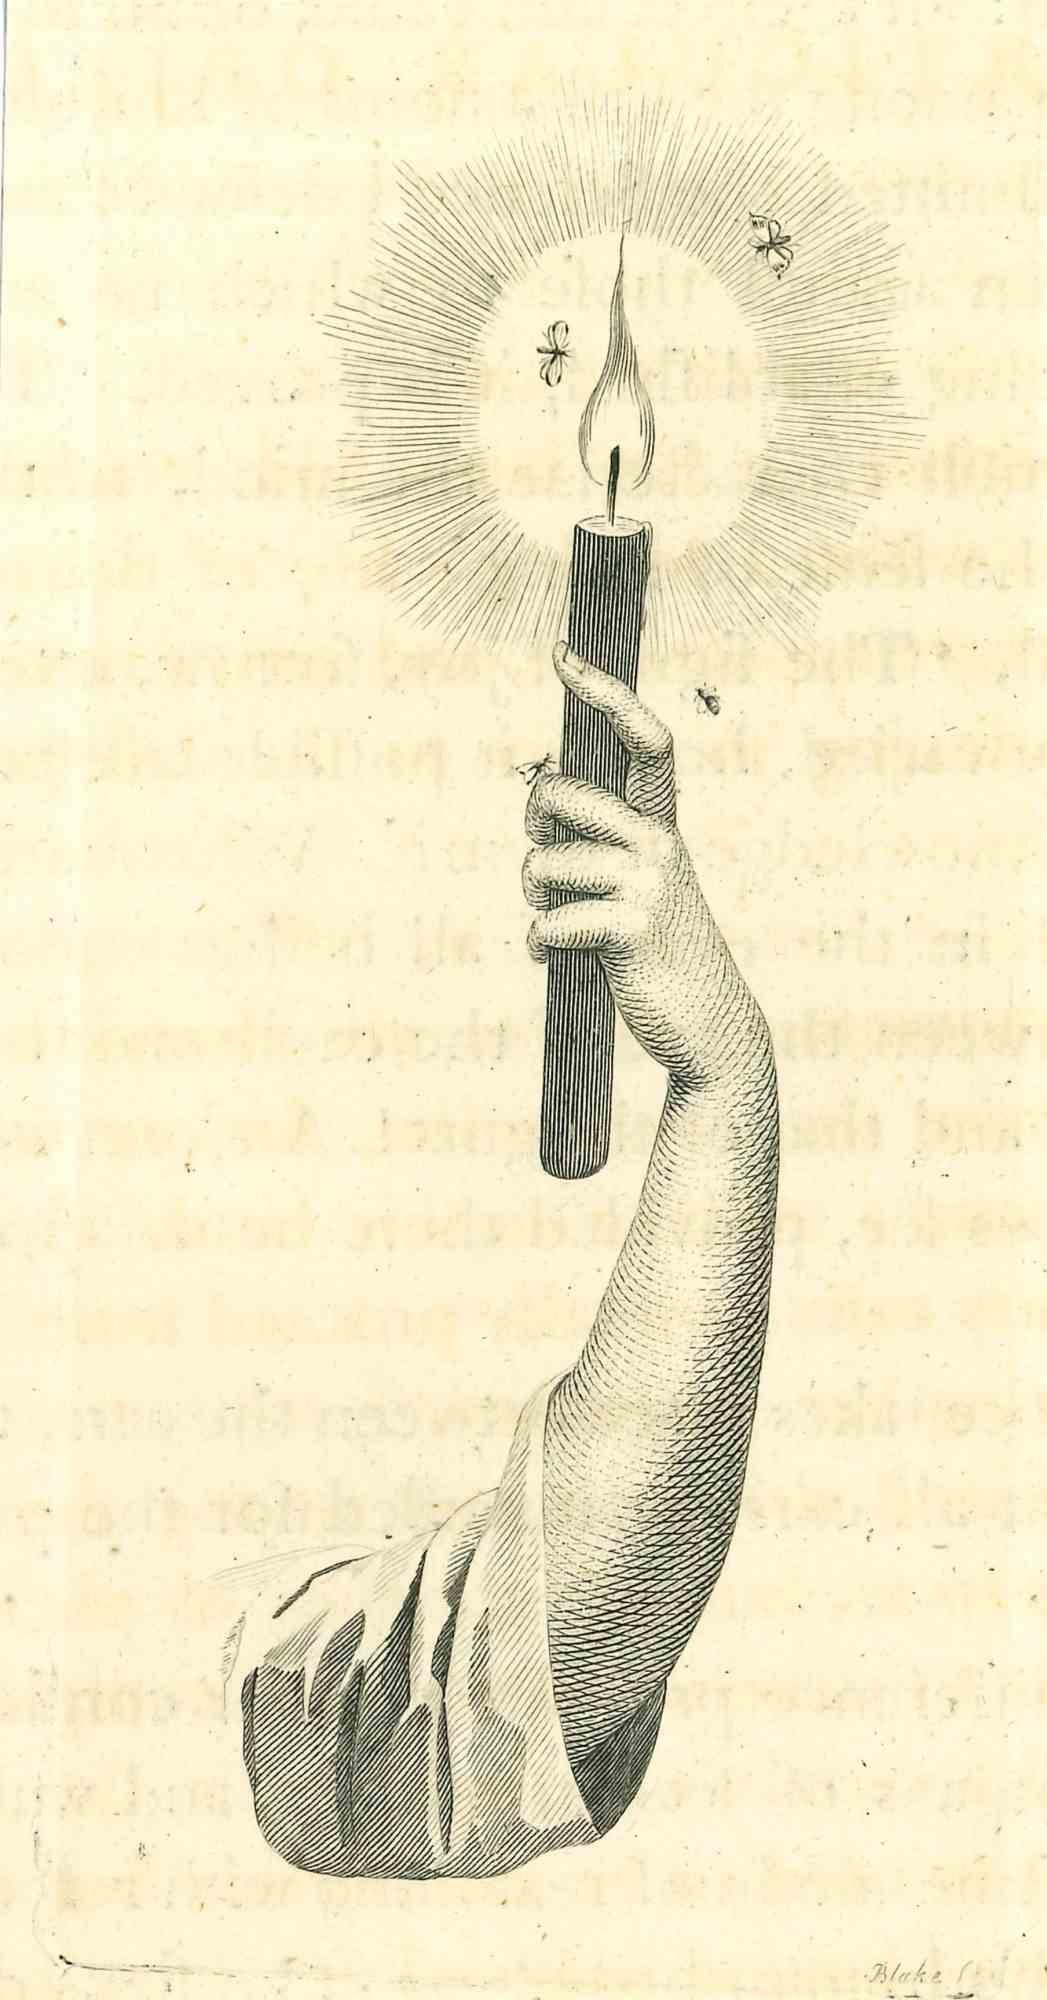 Arm of a Man is an original artwork realized by Thomas Holloway for Johann Caspar Lavater's  "Essays on Physiognomy, Designed to promote the Knowledge and the Love of Mankind", London, Bensley, 1810. 

 This artwork portrays an arm of a man, with a